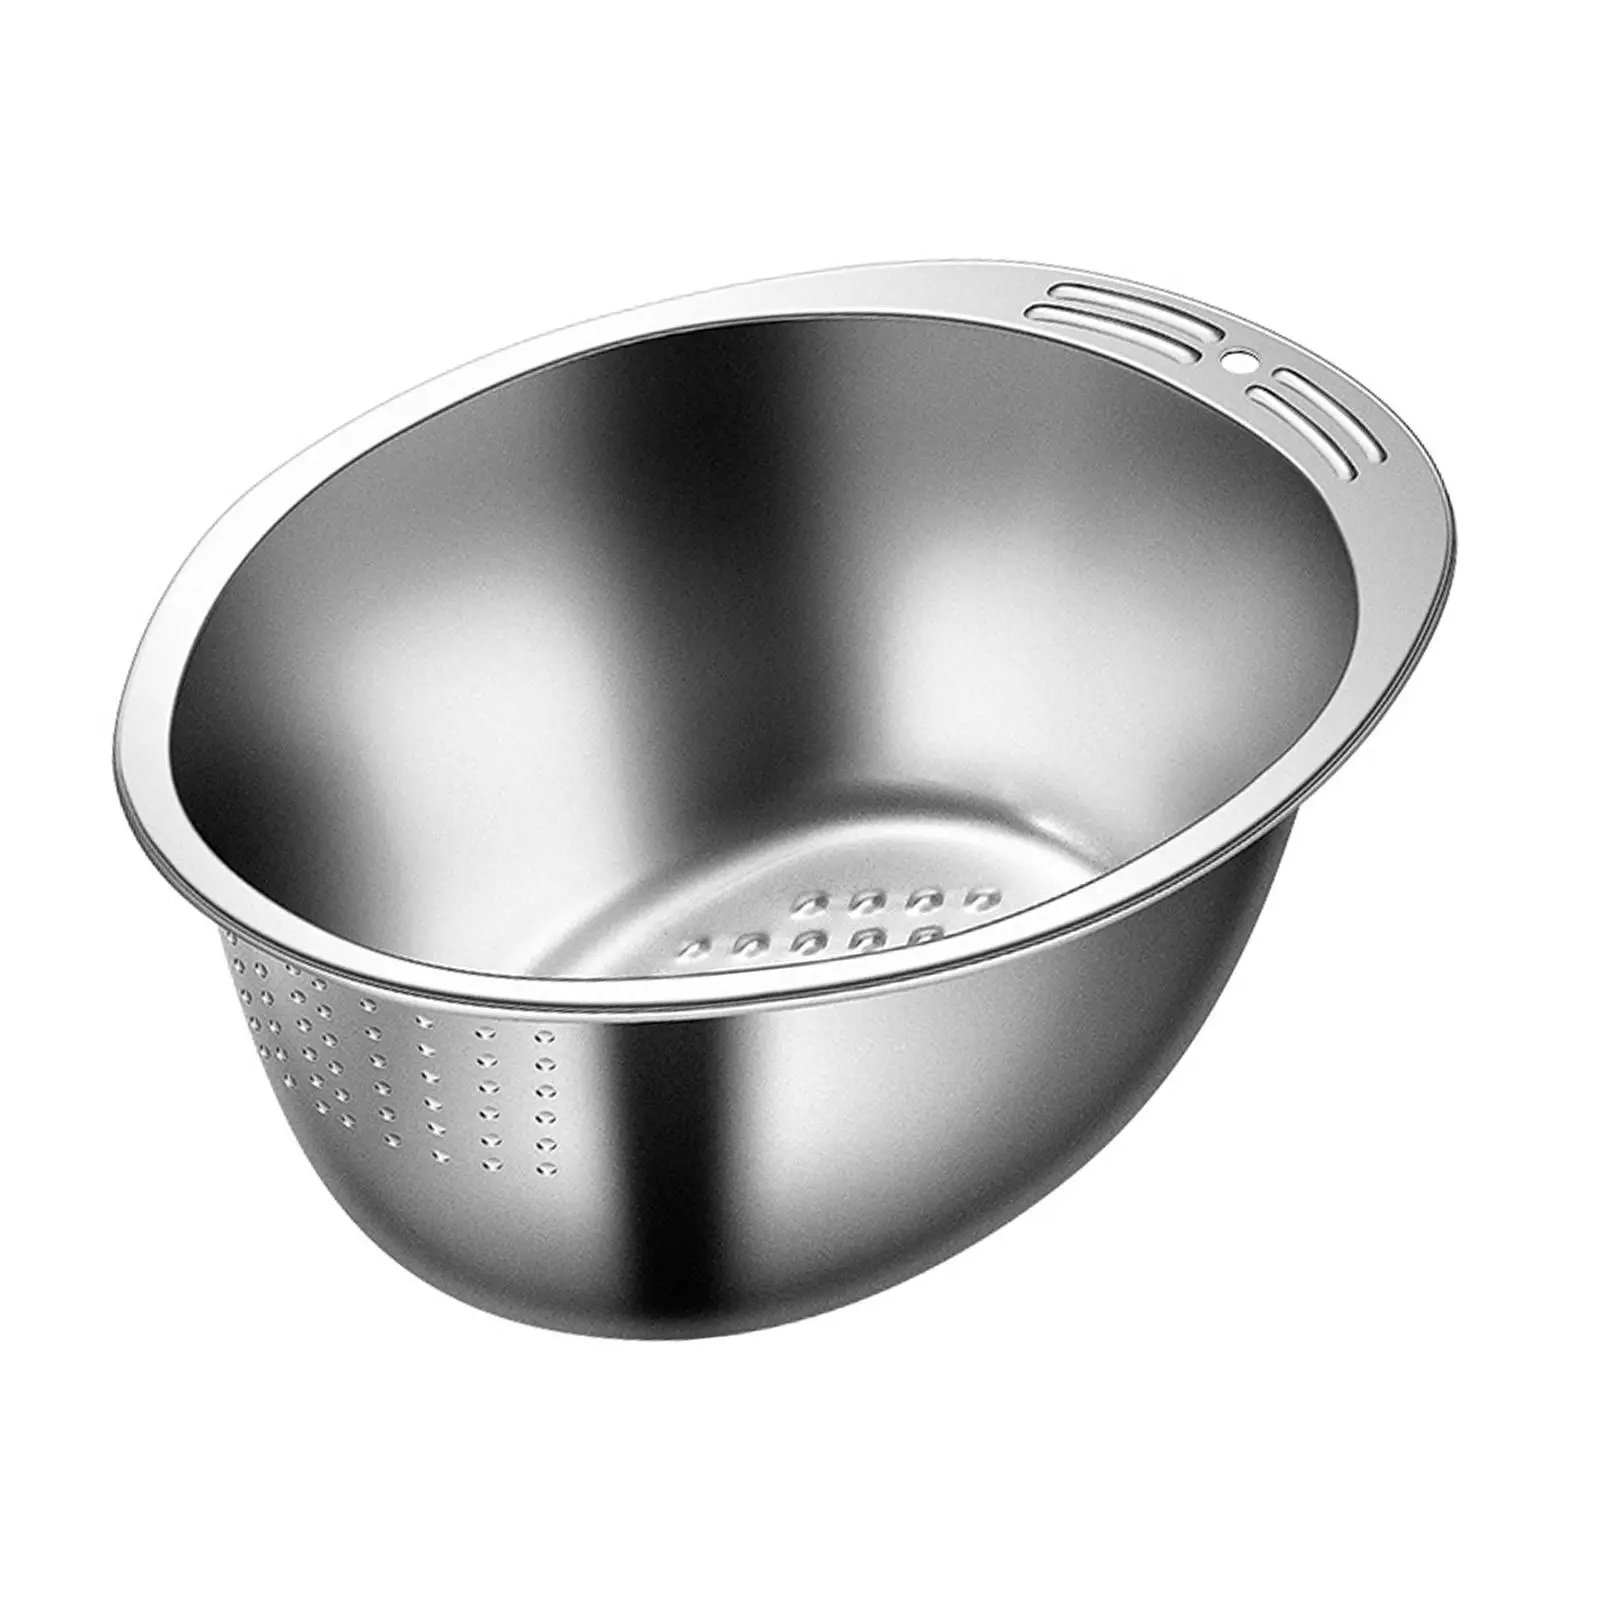 Vegetables Drain Basket Stainless Steel Drainer Basket Rice Washer Strainer Bowl Colander for Grapes Carrots Tomatoes